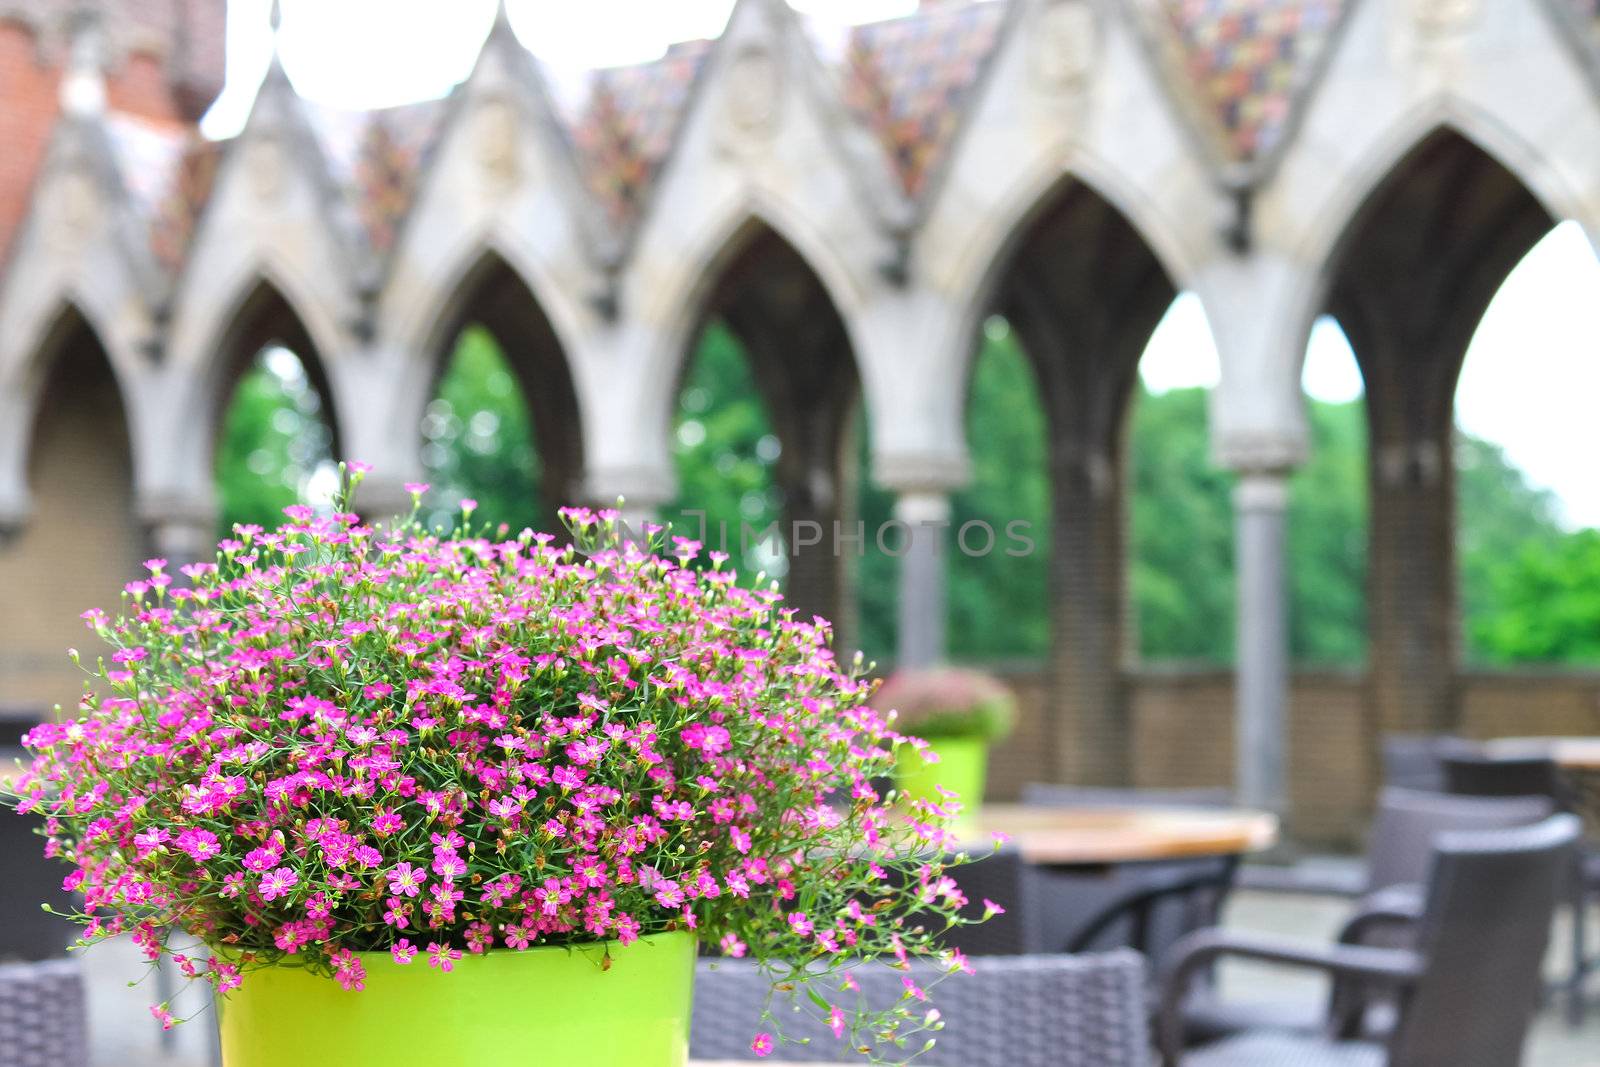 Flowers on the tables cafe in the castle Heeswijk. Netherlands by NickNick